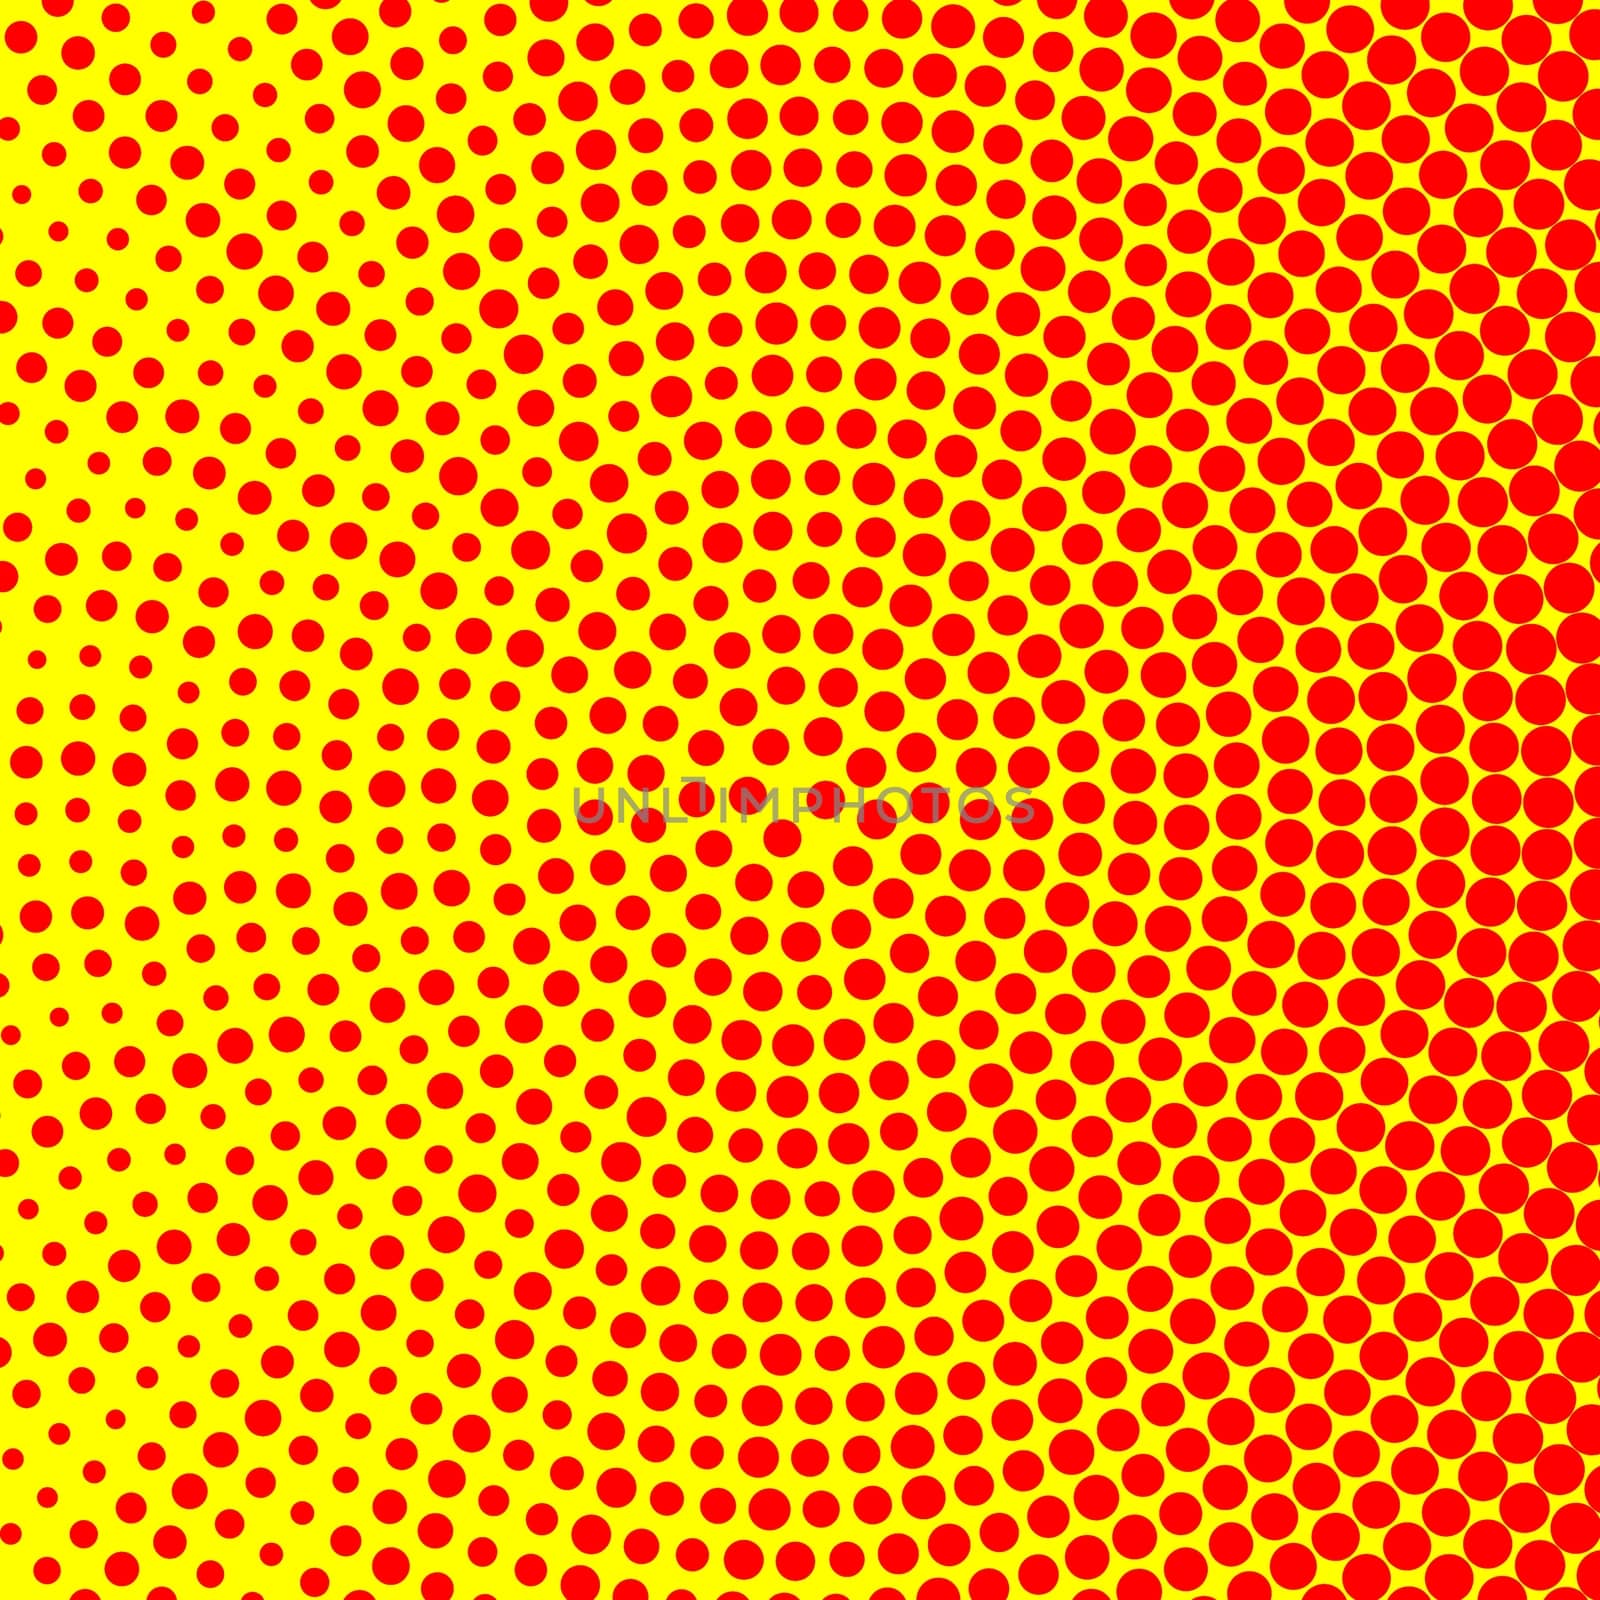 Simple circle halftone background by hamik